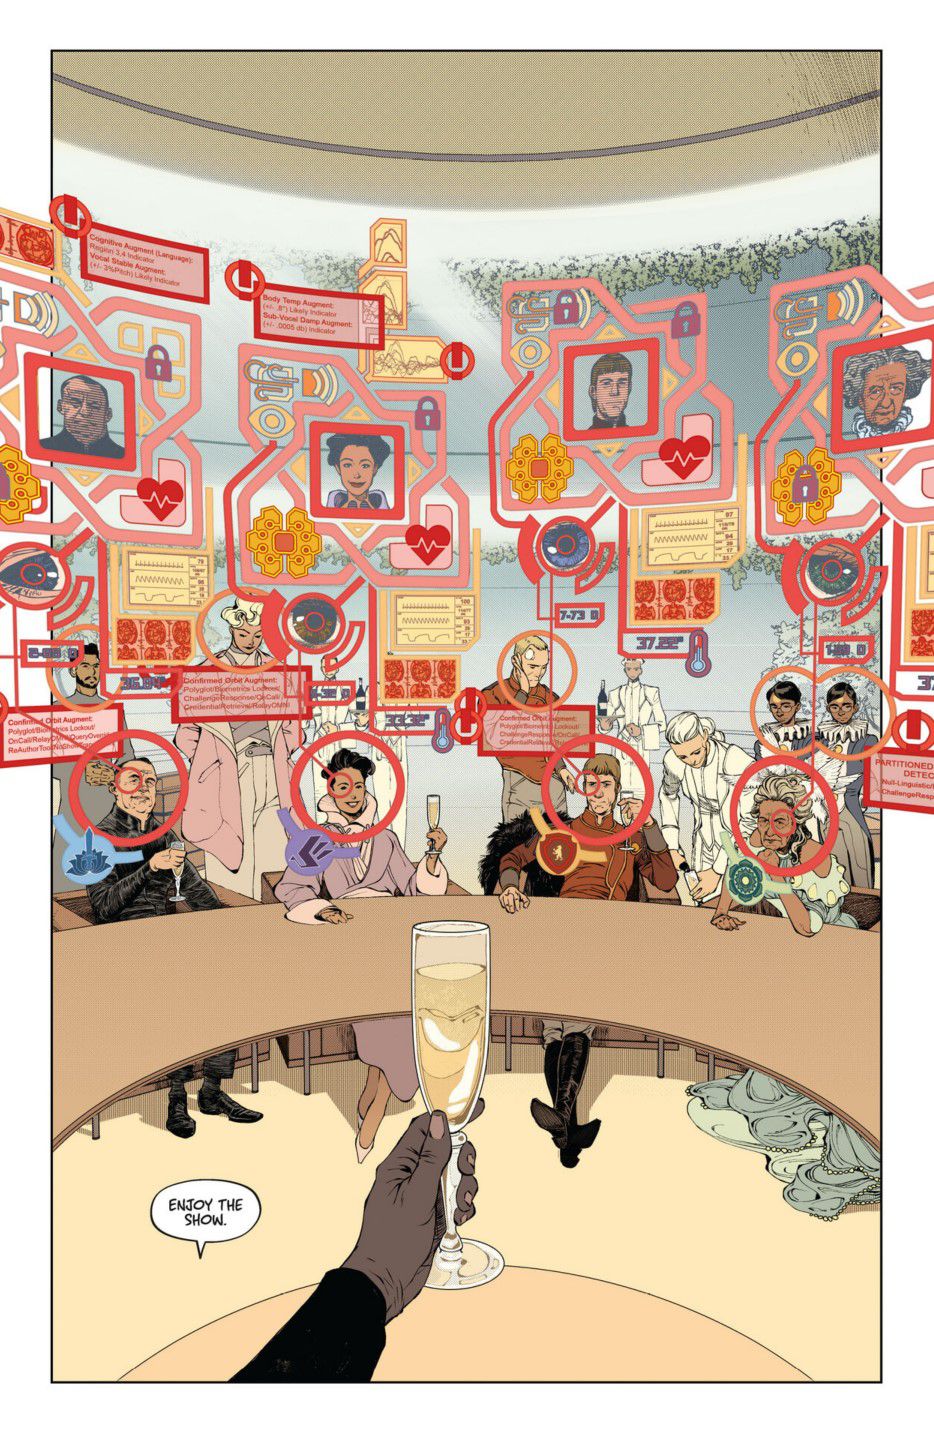 A full-page illustration from Dawnrunner #1, featuring a point-of-view shot of a man holding a champagne glass to a table of guests identified through an augmented reality heads-up display.